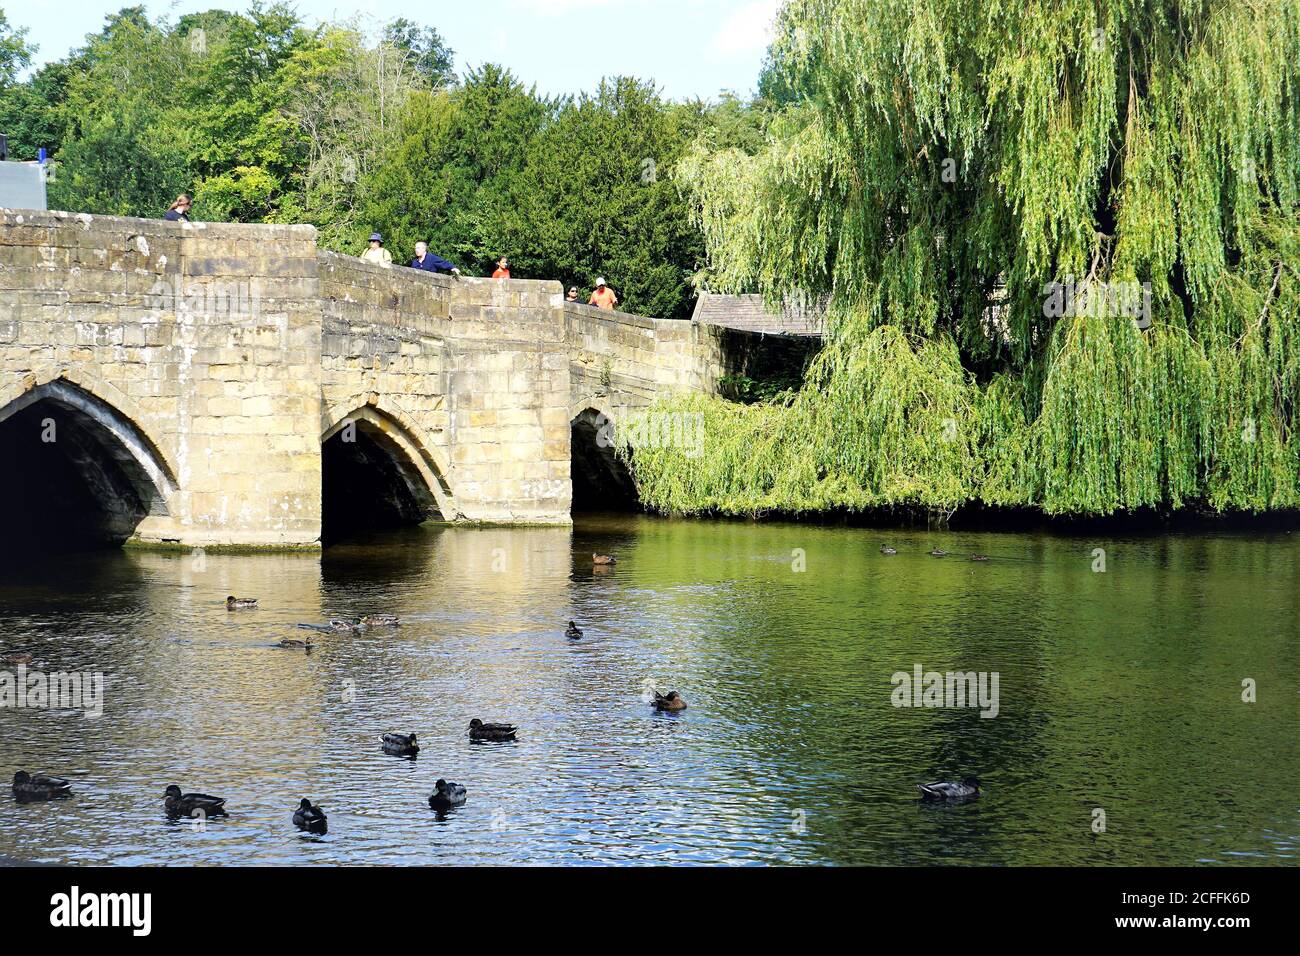 Bakewell, Derbyshire, UK.  August 24, 2020.  Tourists walking over the 13th century bridge over the river Wye at Bakewell in Derbyshire, UK. Stock Photo